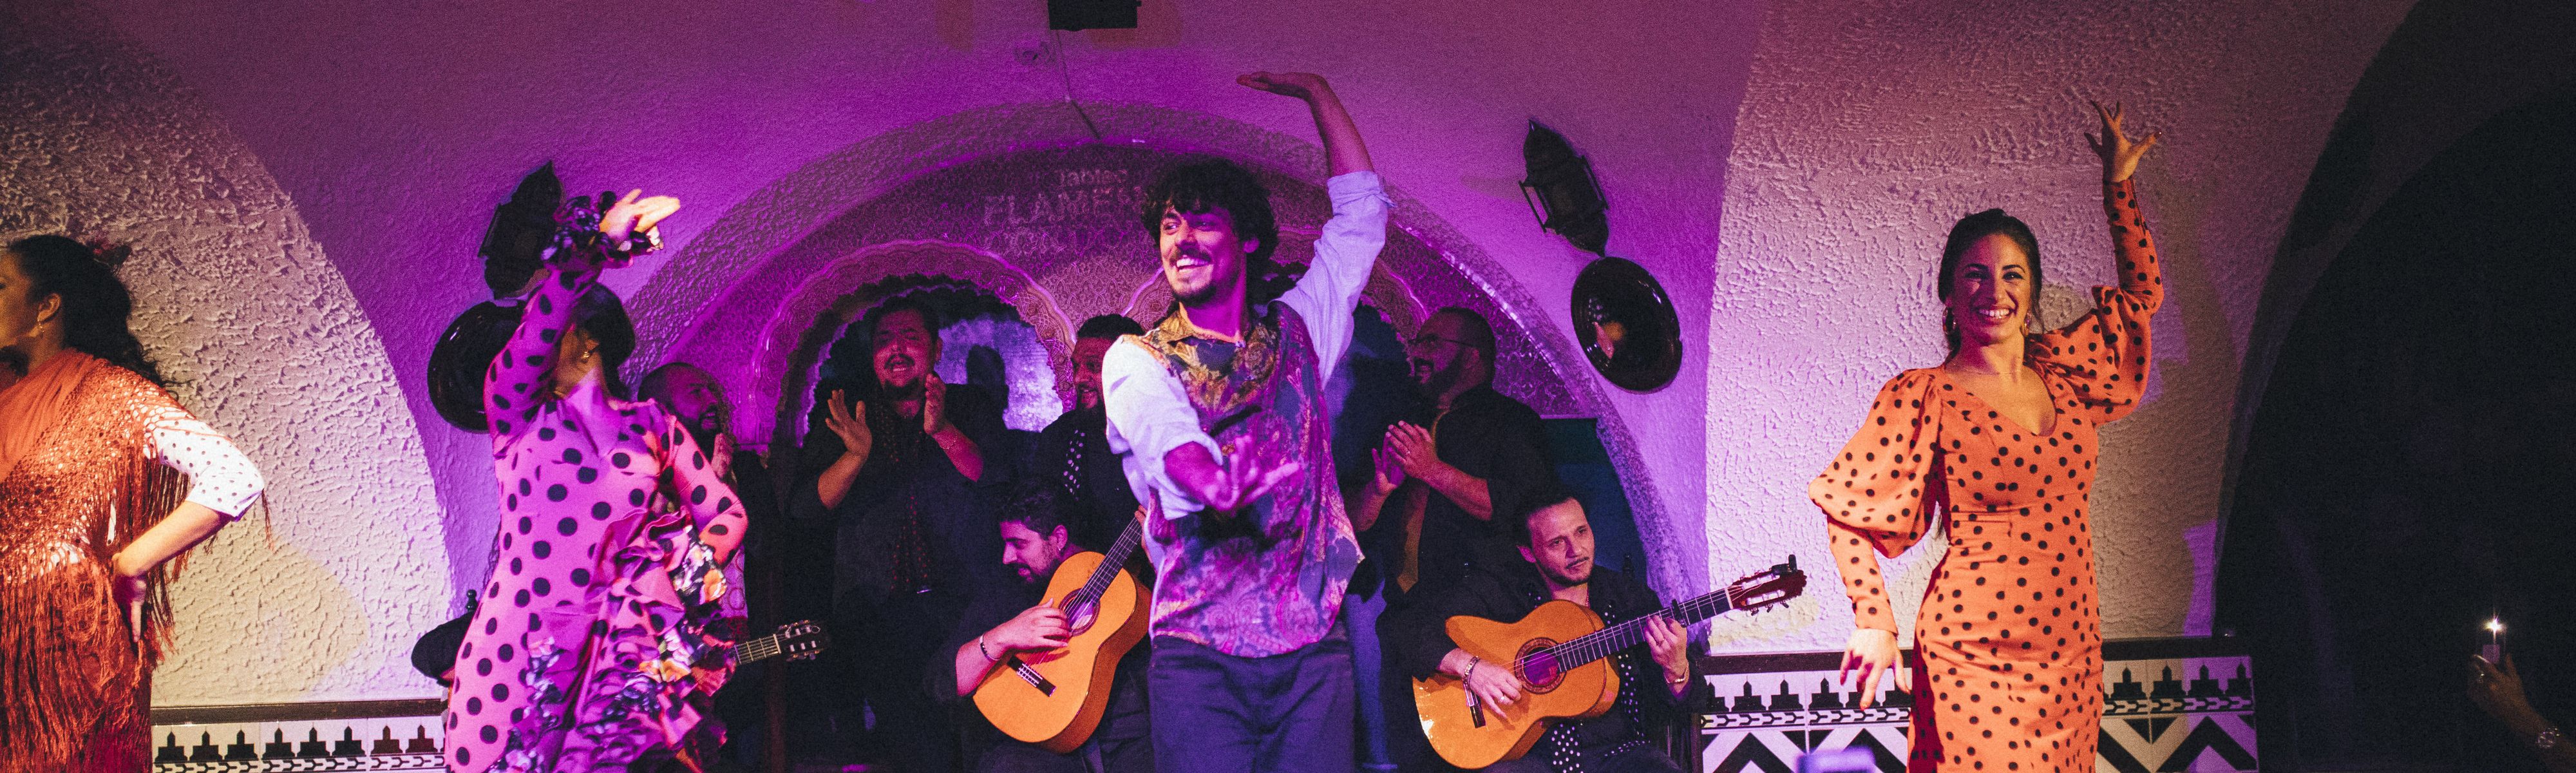 spanish dancers performing at a flamenco show in barcelona